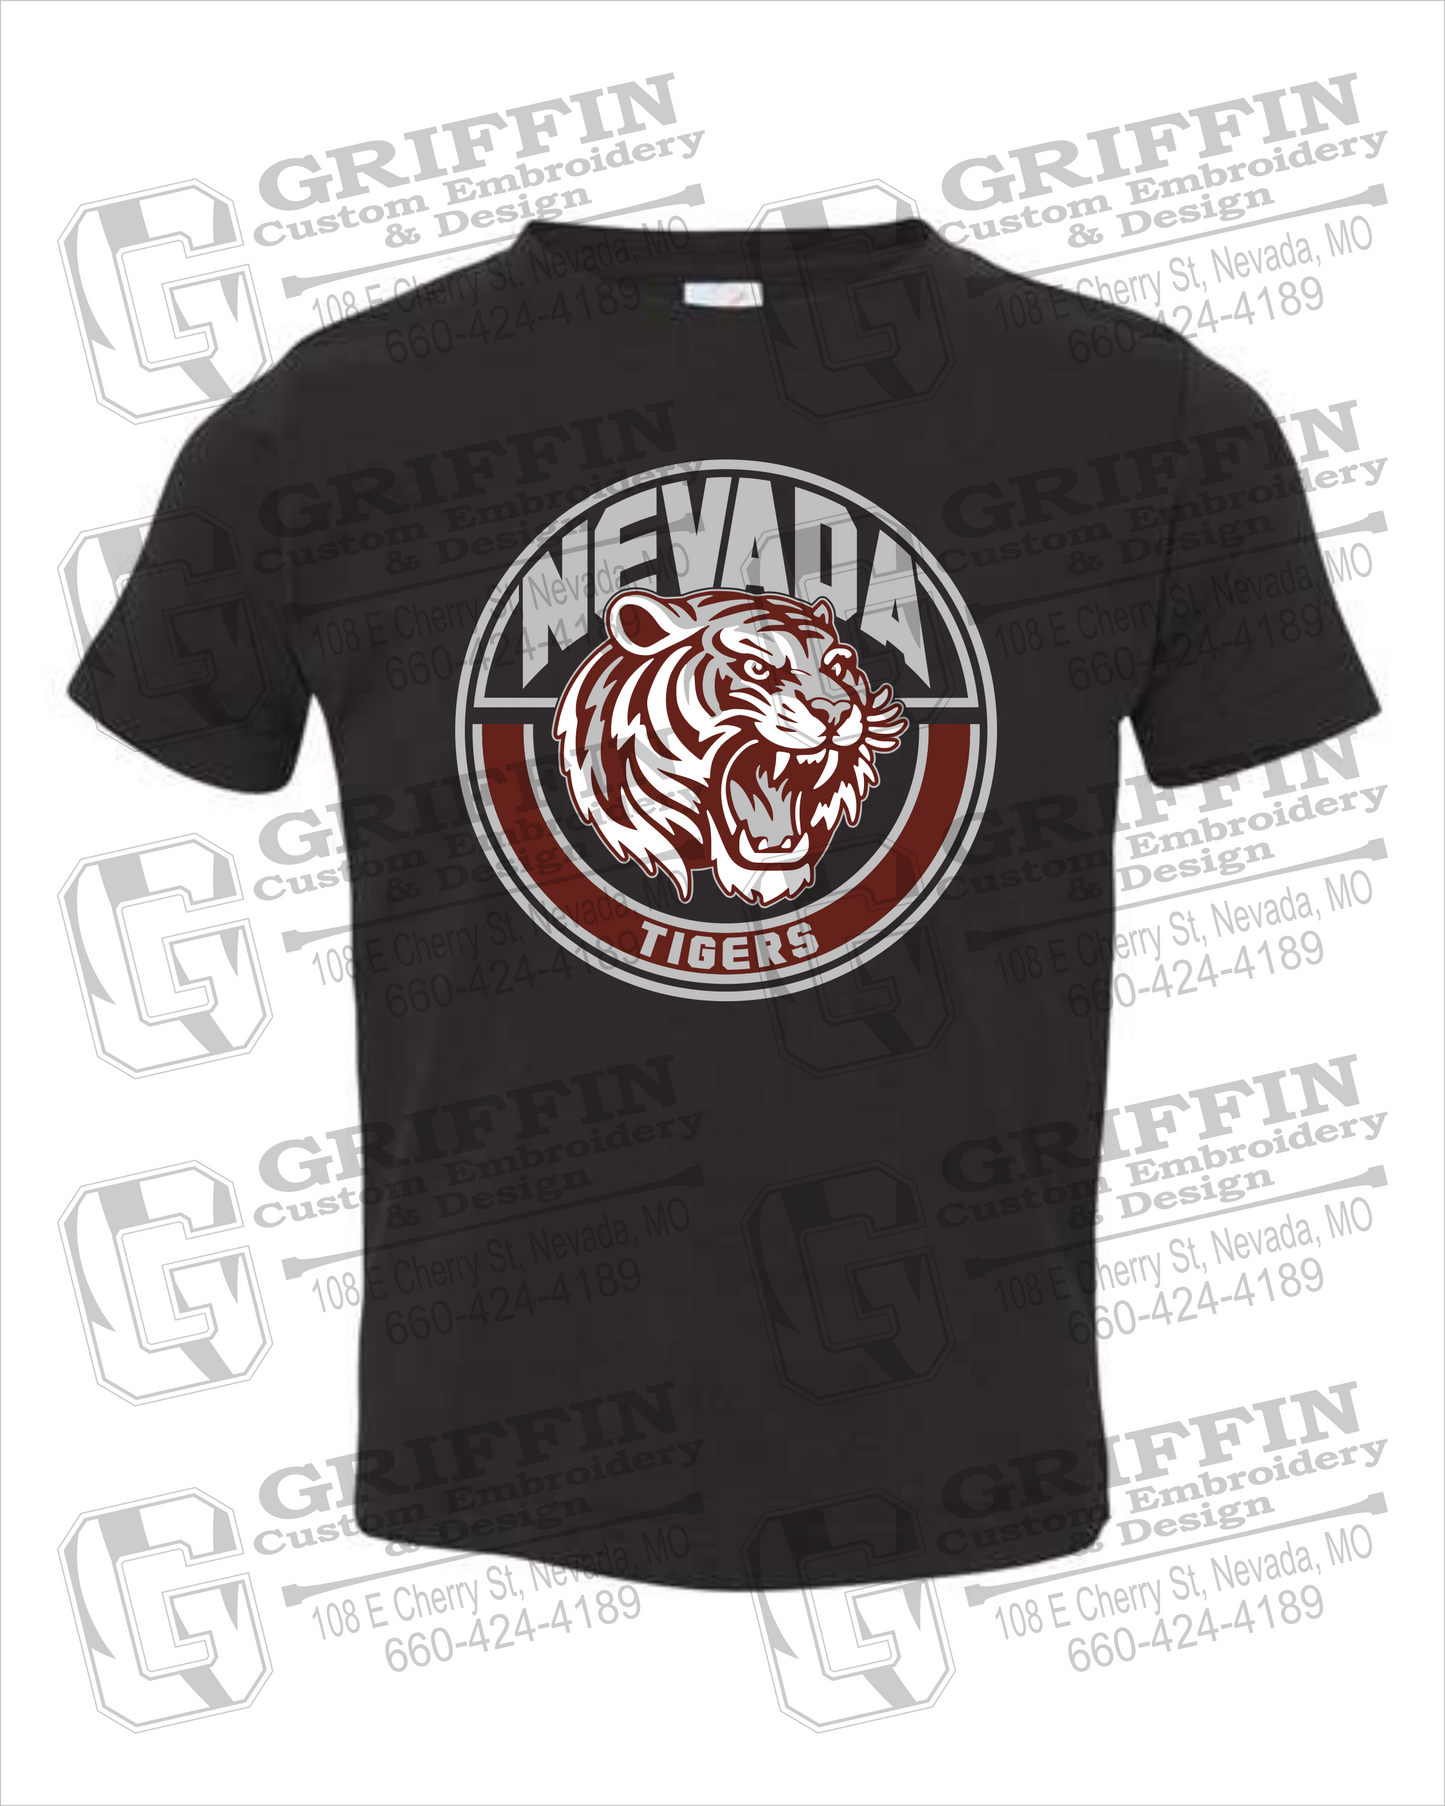 Nevada Tigers 24-H Toddler/Infant T-Shirt